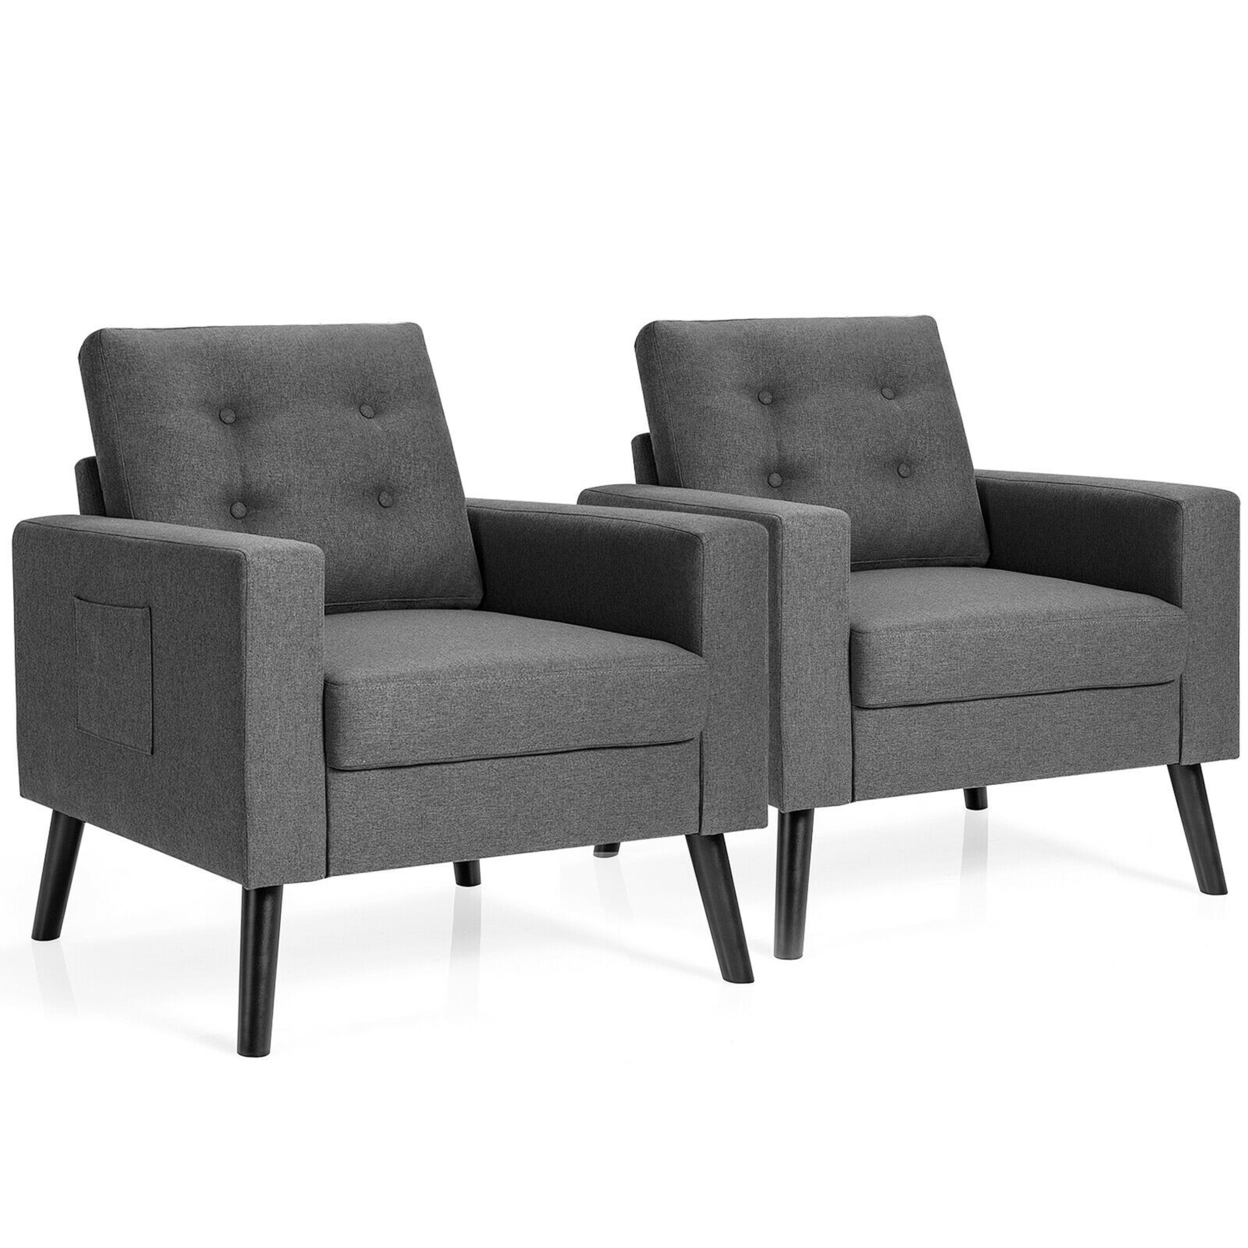 Set Of 2 Upholstered Accent Chair Single Sofa Armchair W/ Wooden Legs - Grey